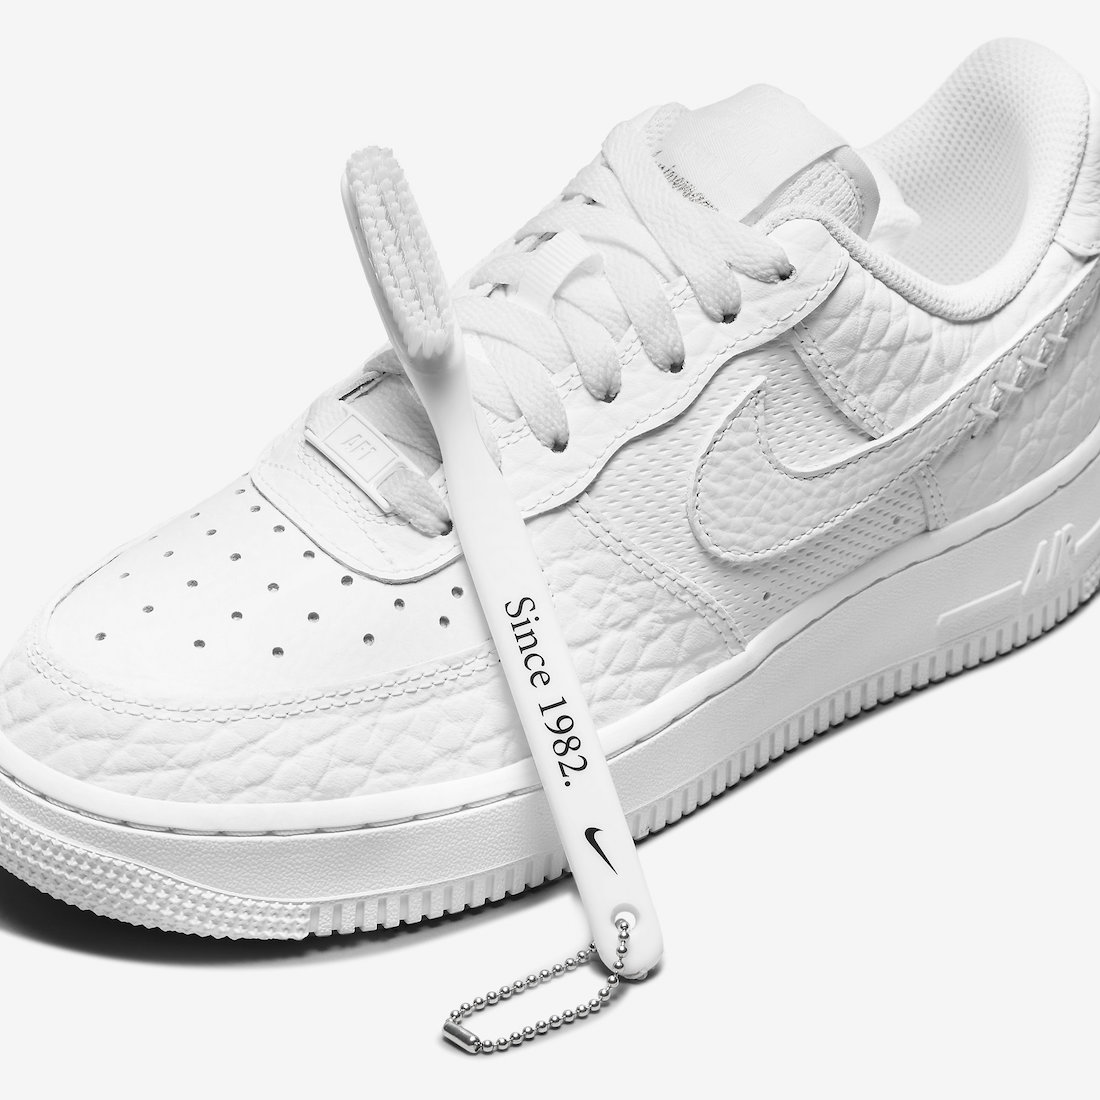 Nike Air Force 1 Low Color of the Month DZ4711-100 Release Date Toothbrush